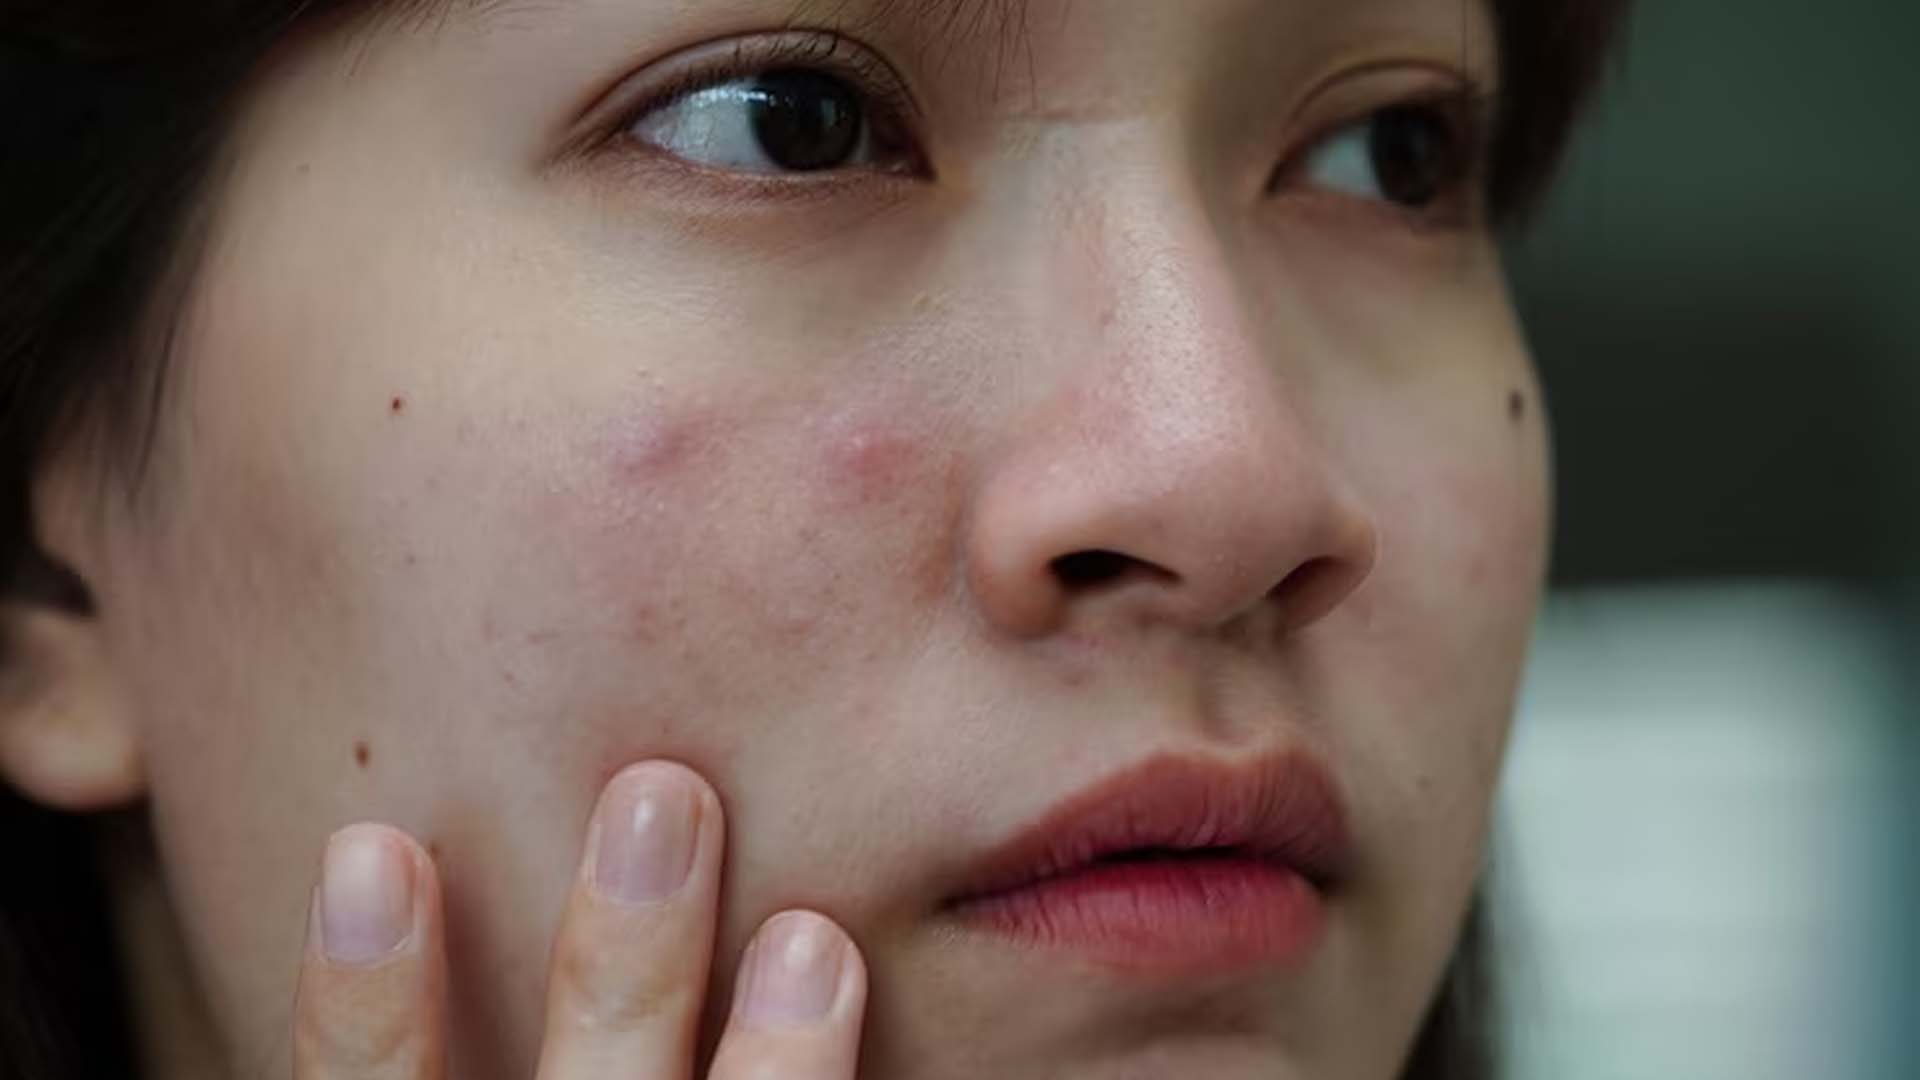 Bumps on the face or Acne